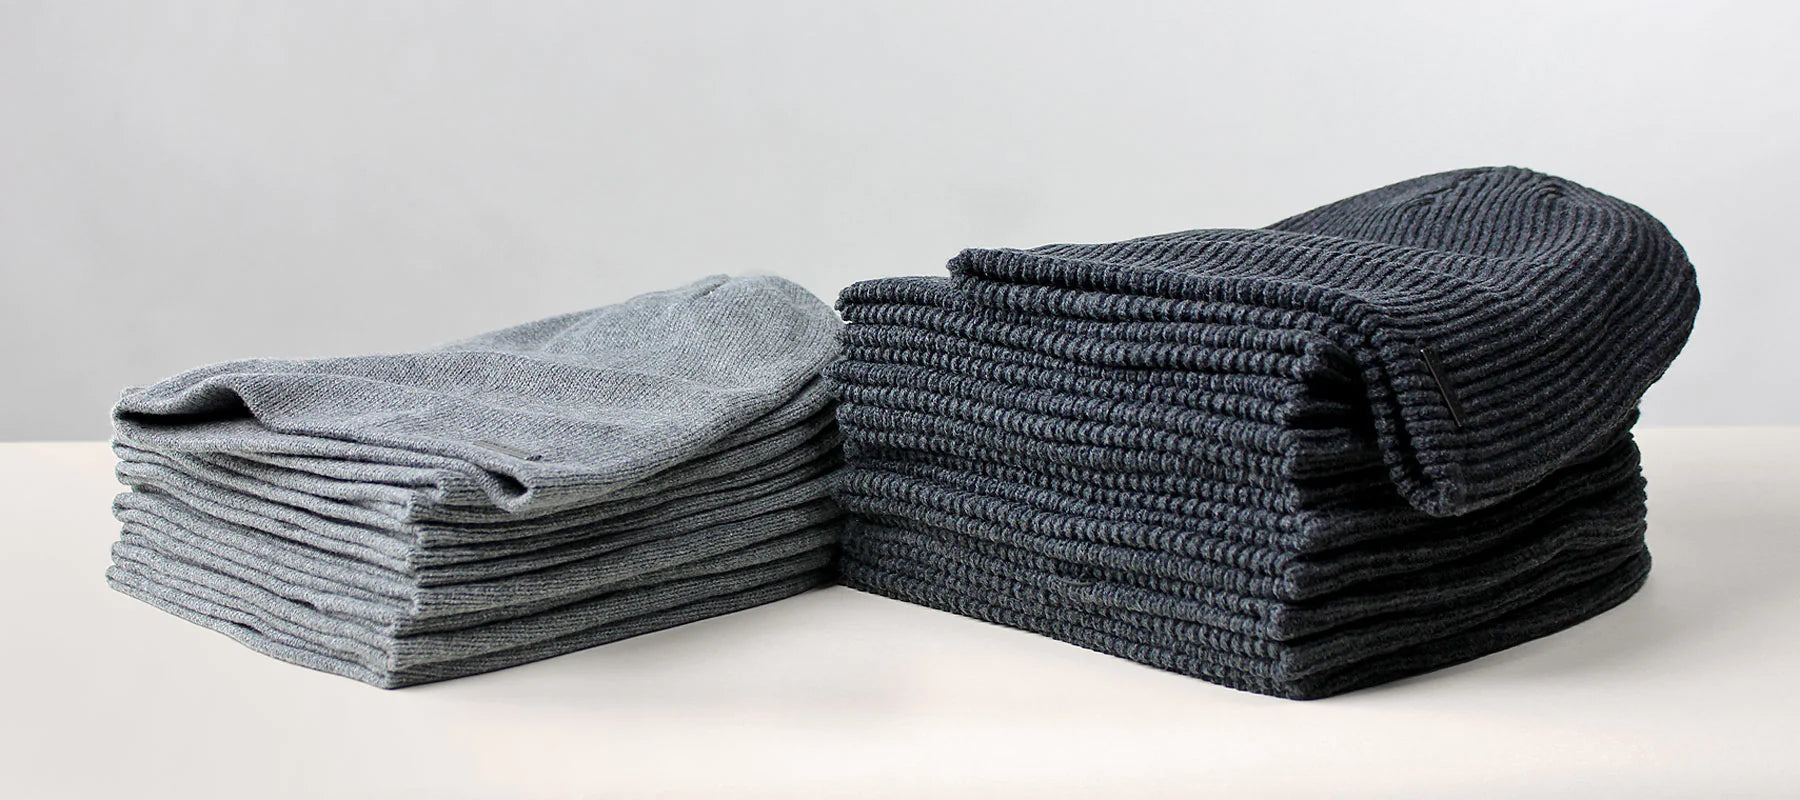 Breathable Summer Beanies to Keep You Stylishly Cozy This Spring